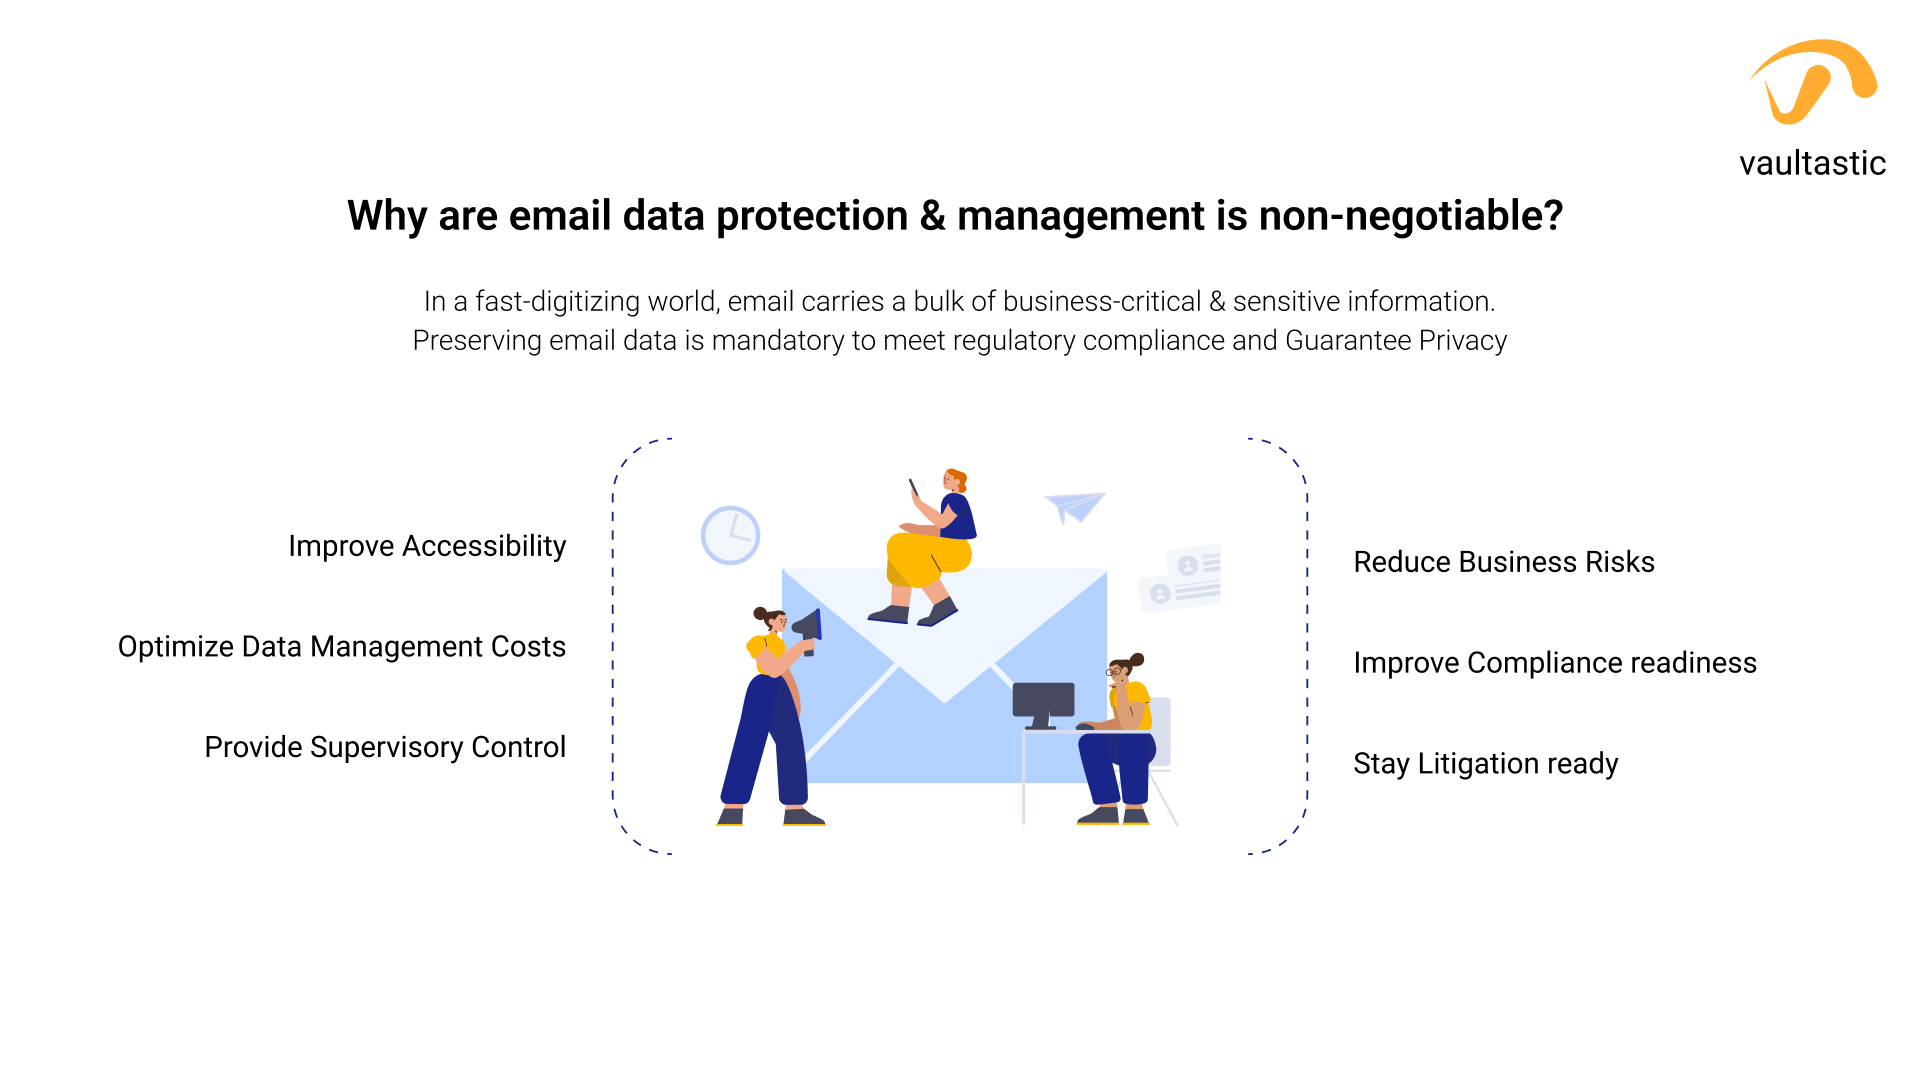 Why are email data protection and management is non-negotiable?